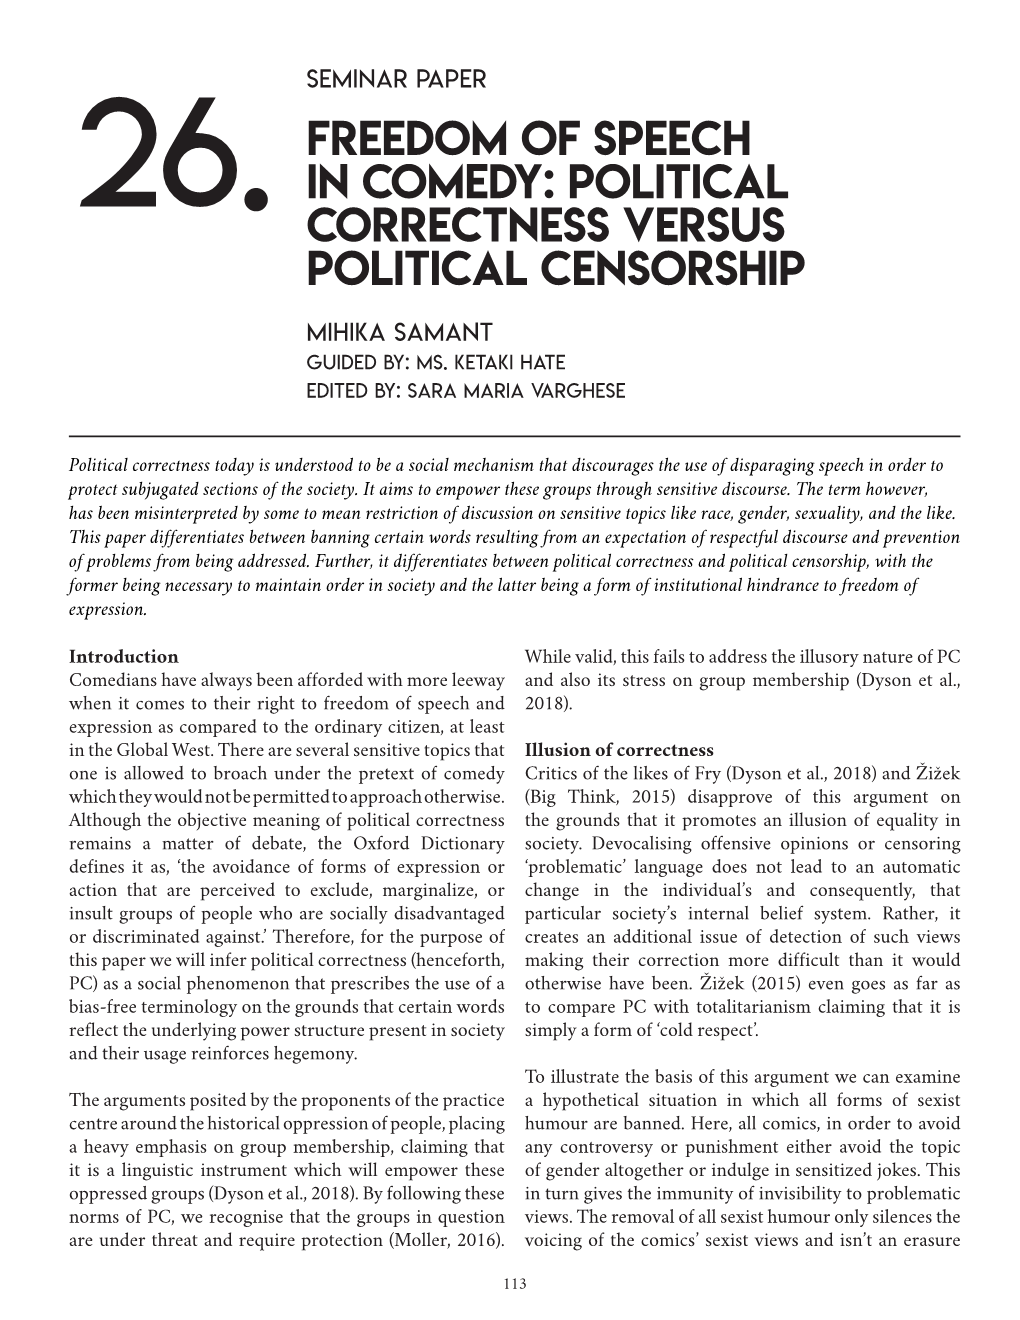 Freedom of Speech in Comedy: Political 26